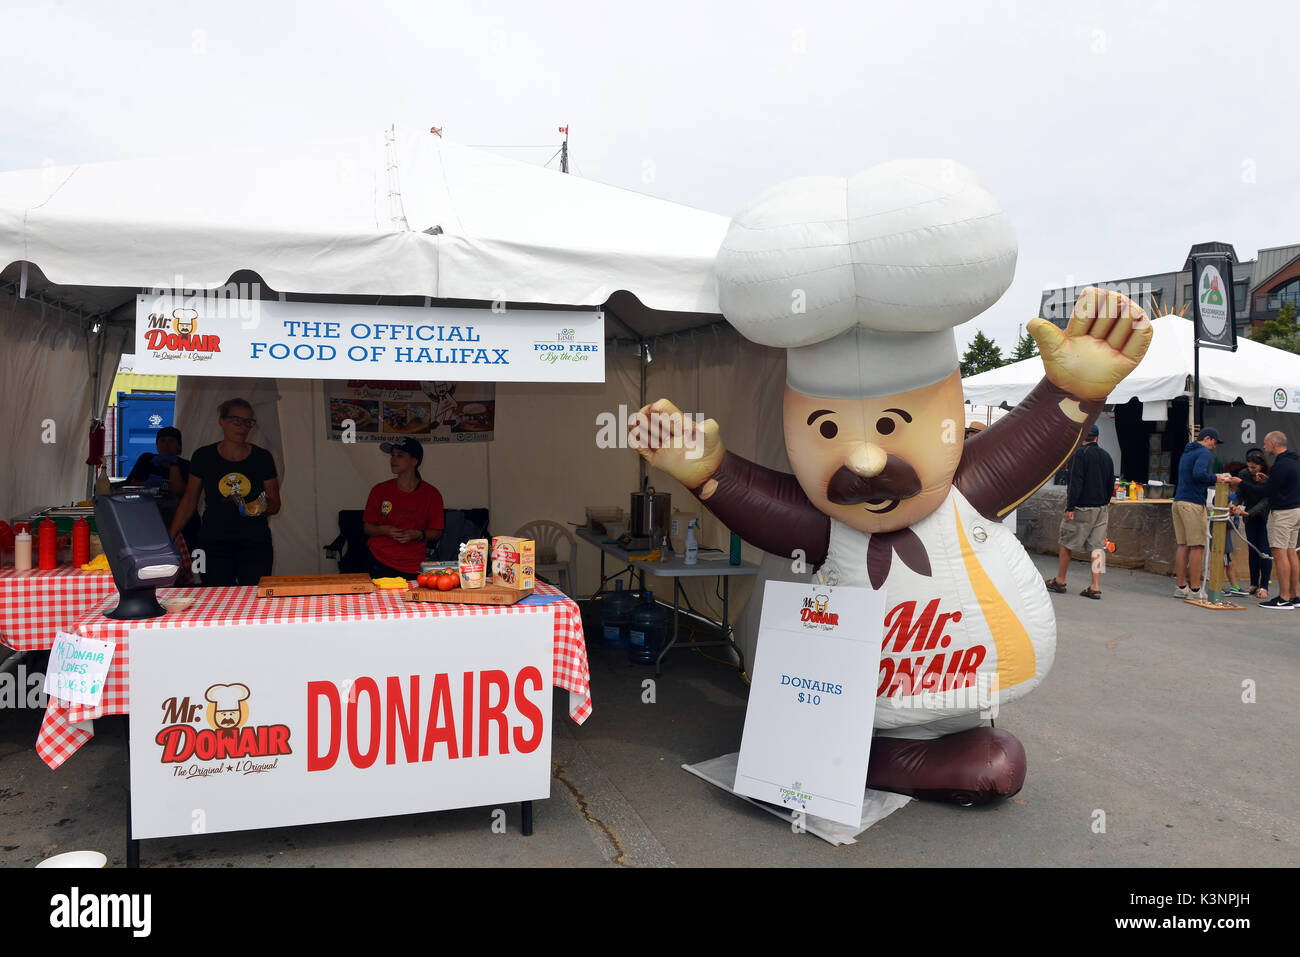 Halifax, Canada - July 29, 2017: Mr. Donair stand at the Taste of Nova Scotia section at the Tall Ships event. The Donair was invented in the Halifax  Stock Photo